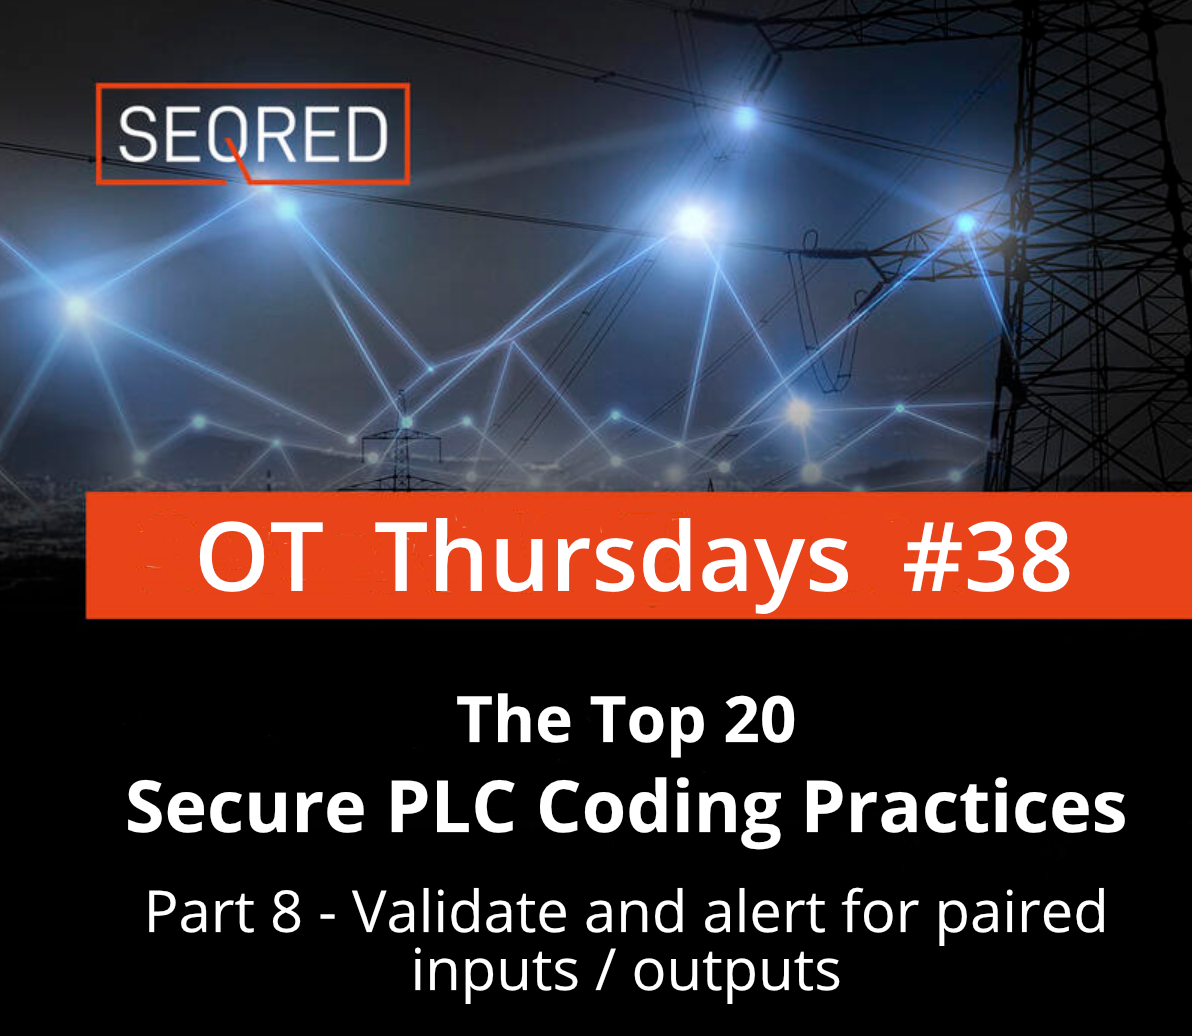 The Top 20 Secure PLC Coding Practices. Part 8 - Validate and alert for paired inputs / output